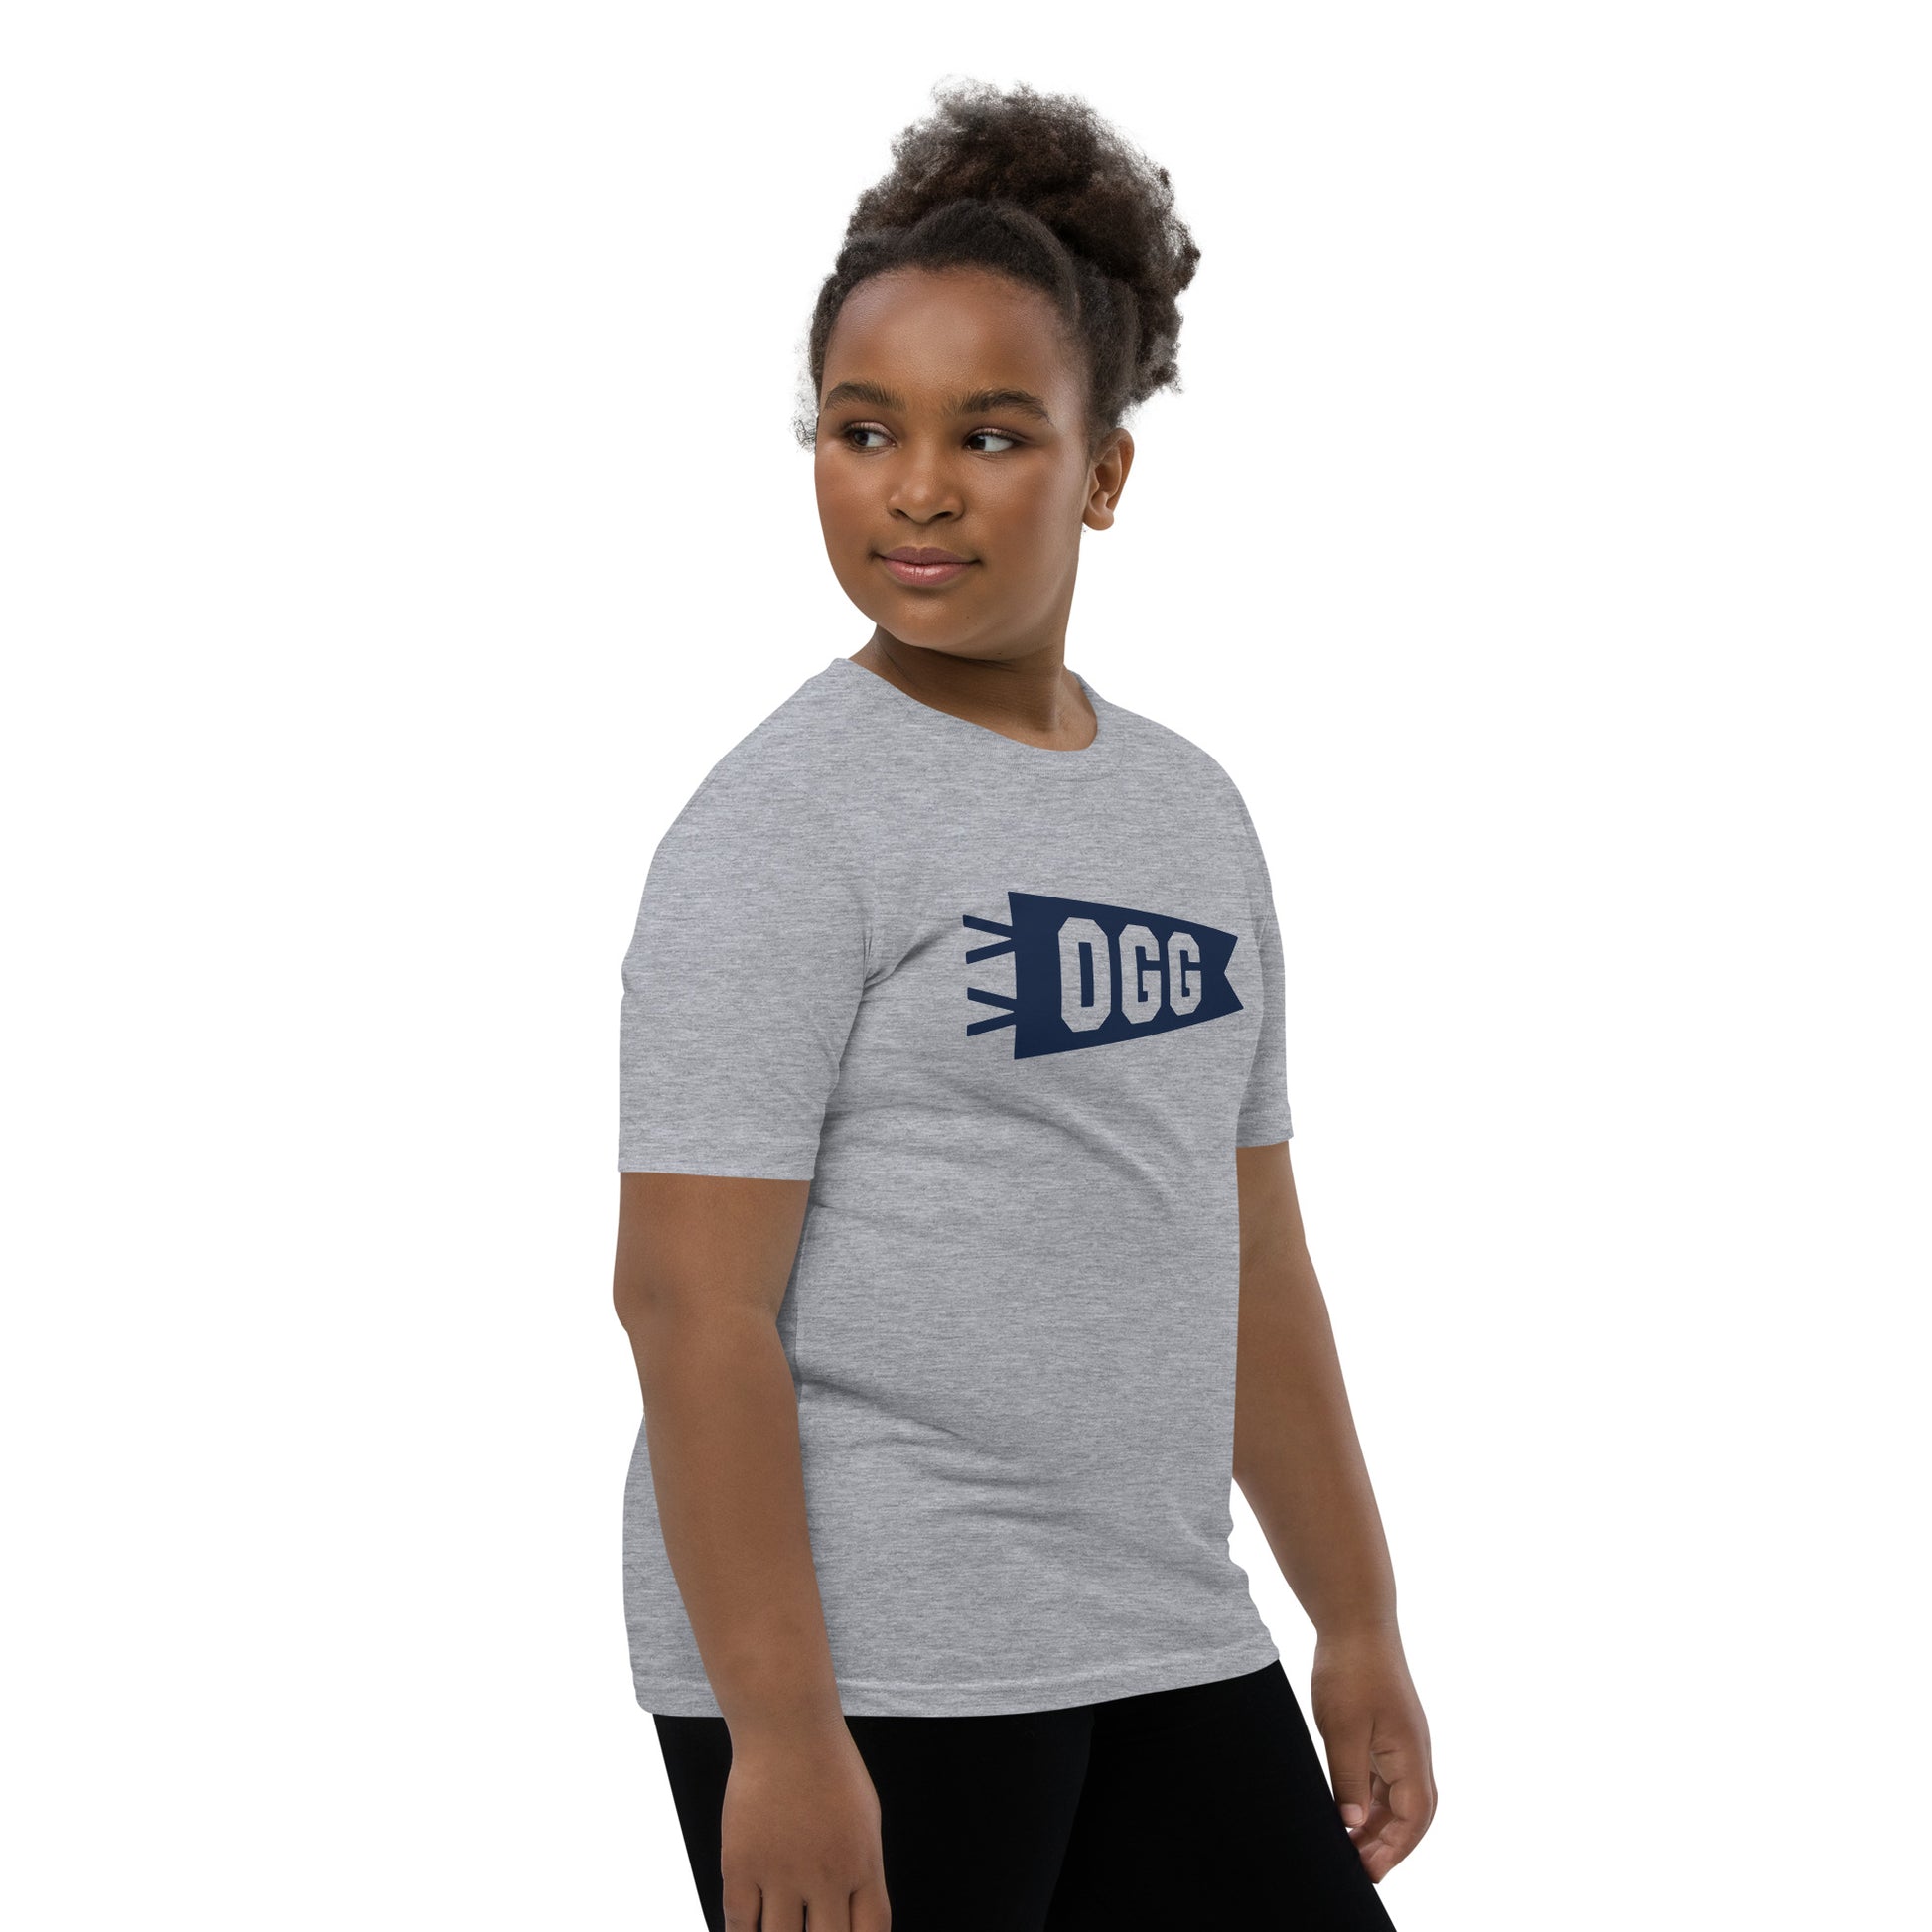 Kid's Airport Code Tee - Navy Blue Graphic • OGG Maui • YHM Designs - Image 03